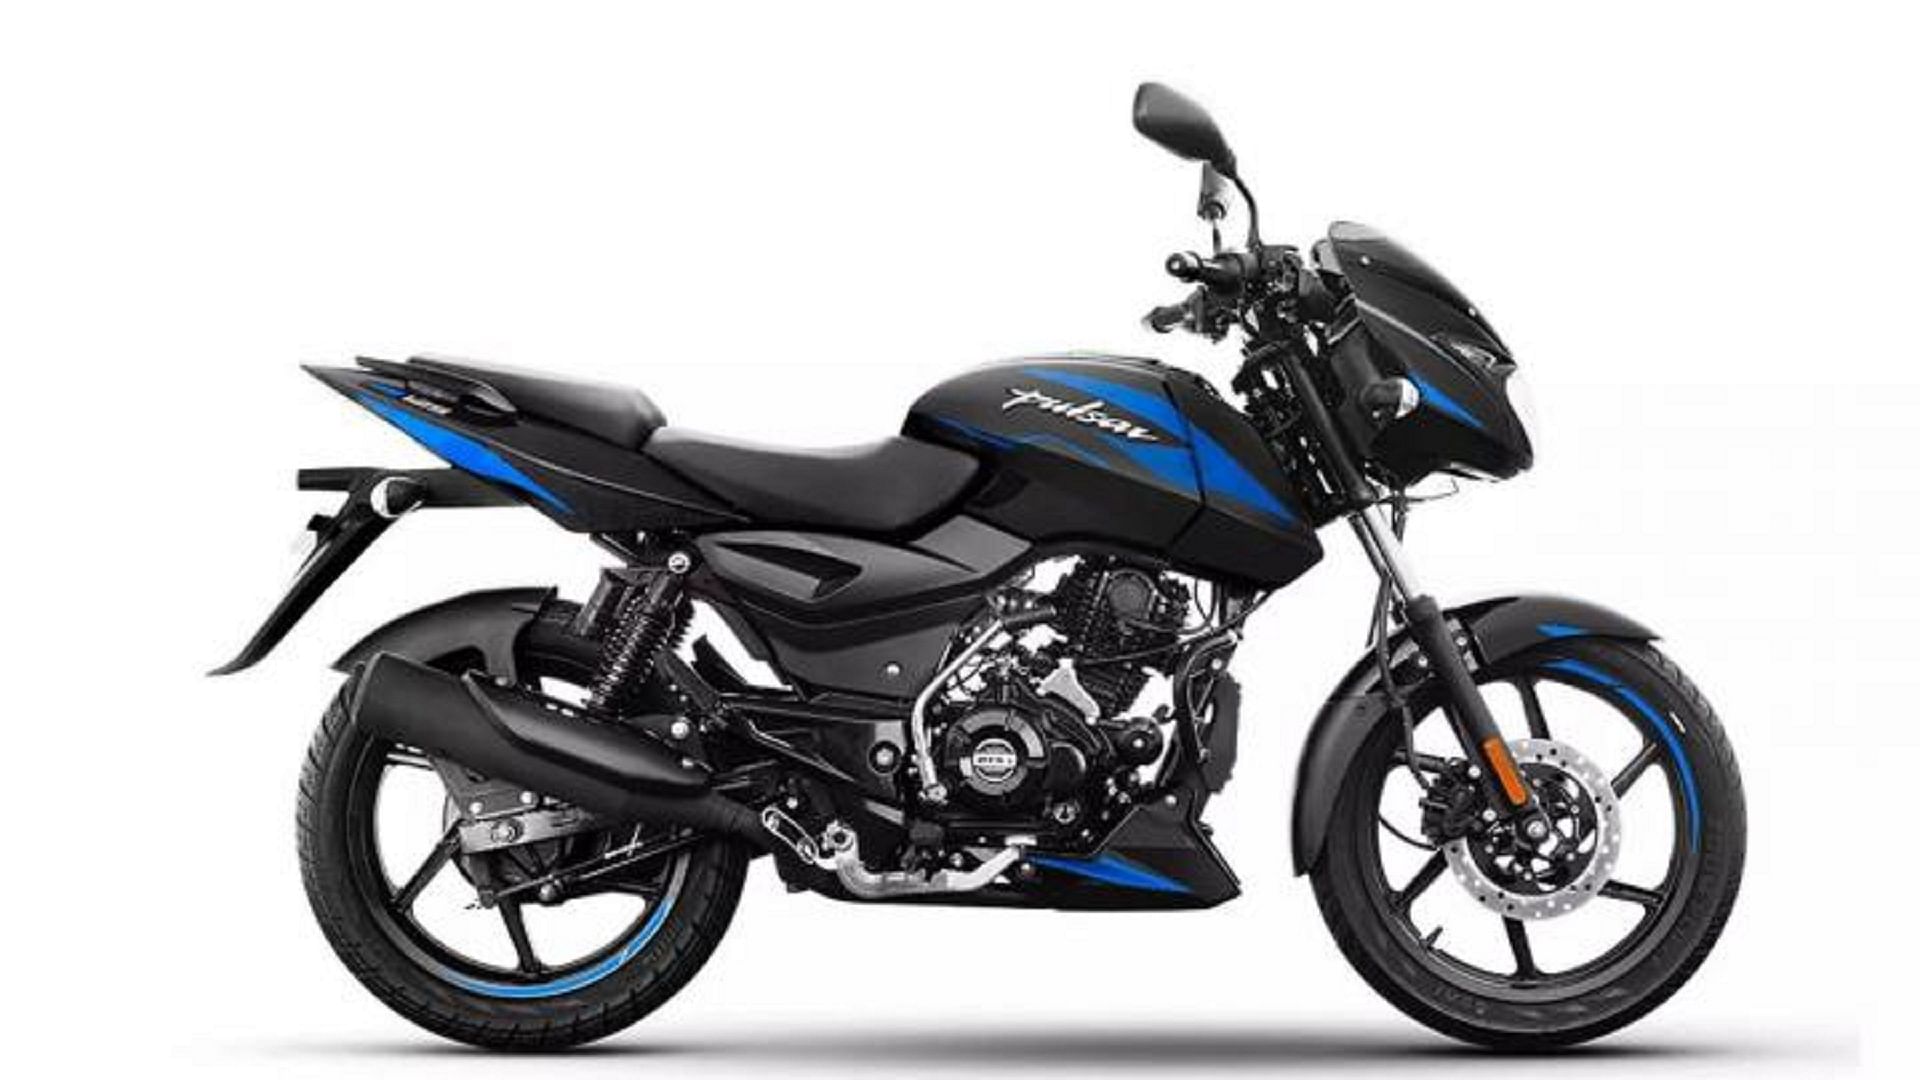 Bajaj Pulsar 125 Carbon Fibre Edition Launched In India Know Price Features  Specs News In Hindi - Amar Ujala Hindi News Live - Bajaj Pulsar 125 Carbon  Fibre Edition:लोकप्रिय बजाज पल्सर रेंज